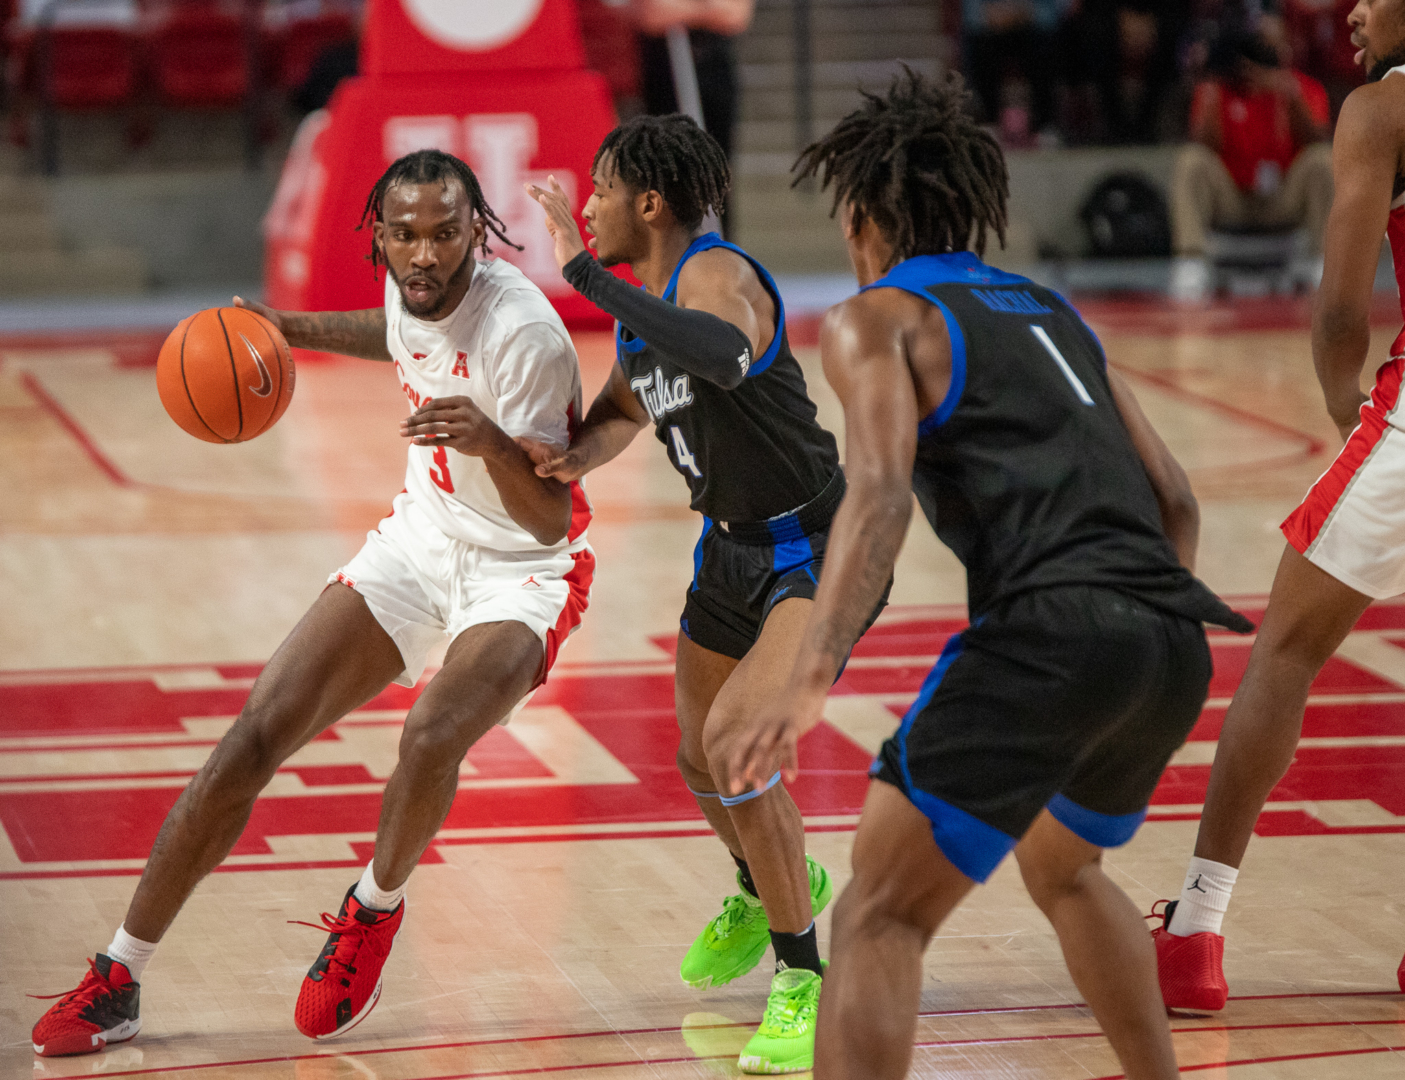 DeJon Jarreau, senior guard for No. 8 Houston, draws the attention of two Tulsa defenders in a game on Jan. 20 inside of the Fertitta Center. | Andy Yanez/The Cougar